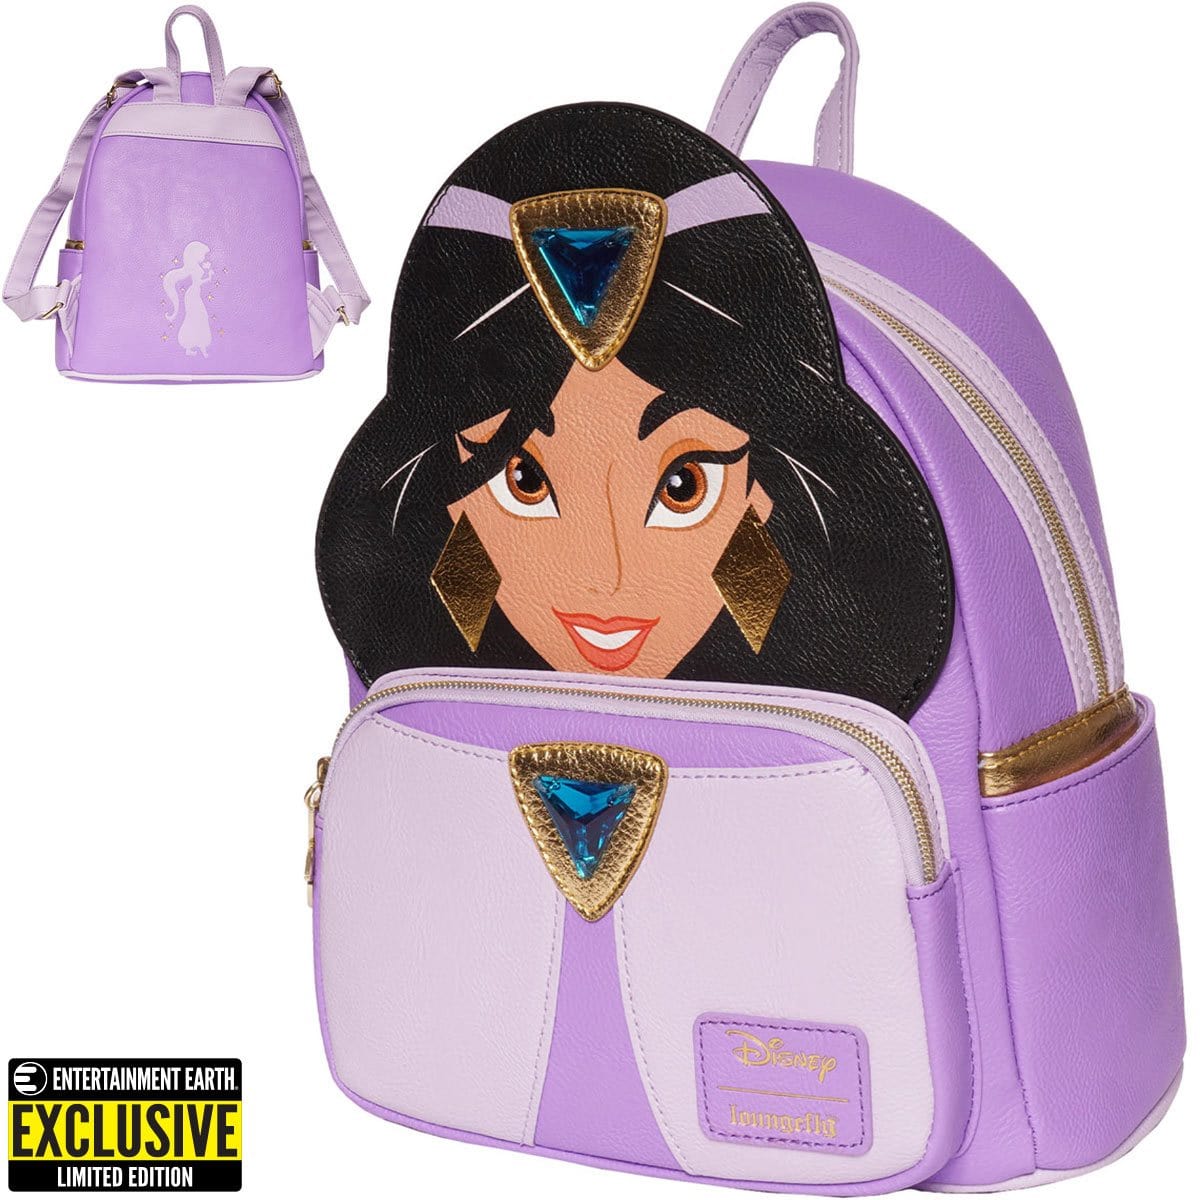 Aladdin Princess Jasmine Purple Outfit Cosplay Mini-Backpack - Entertainment Earth Exclusive Aladdin Princess Jasmine Purple Outfit Cosplay Mini-Backpack - Entertainment Earth Exclusive